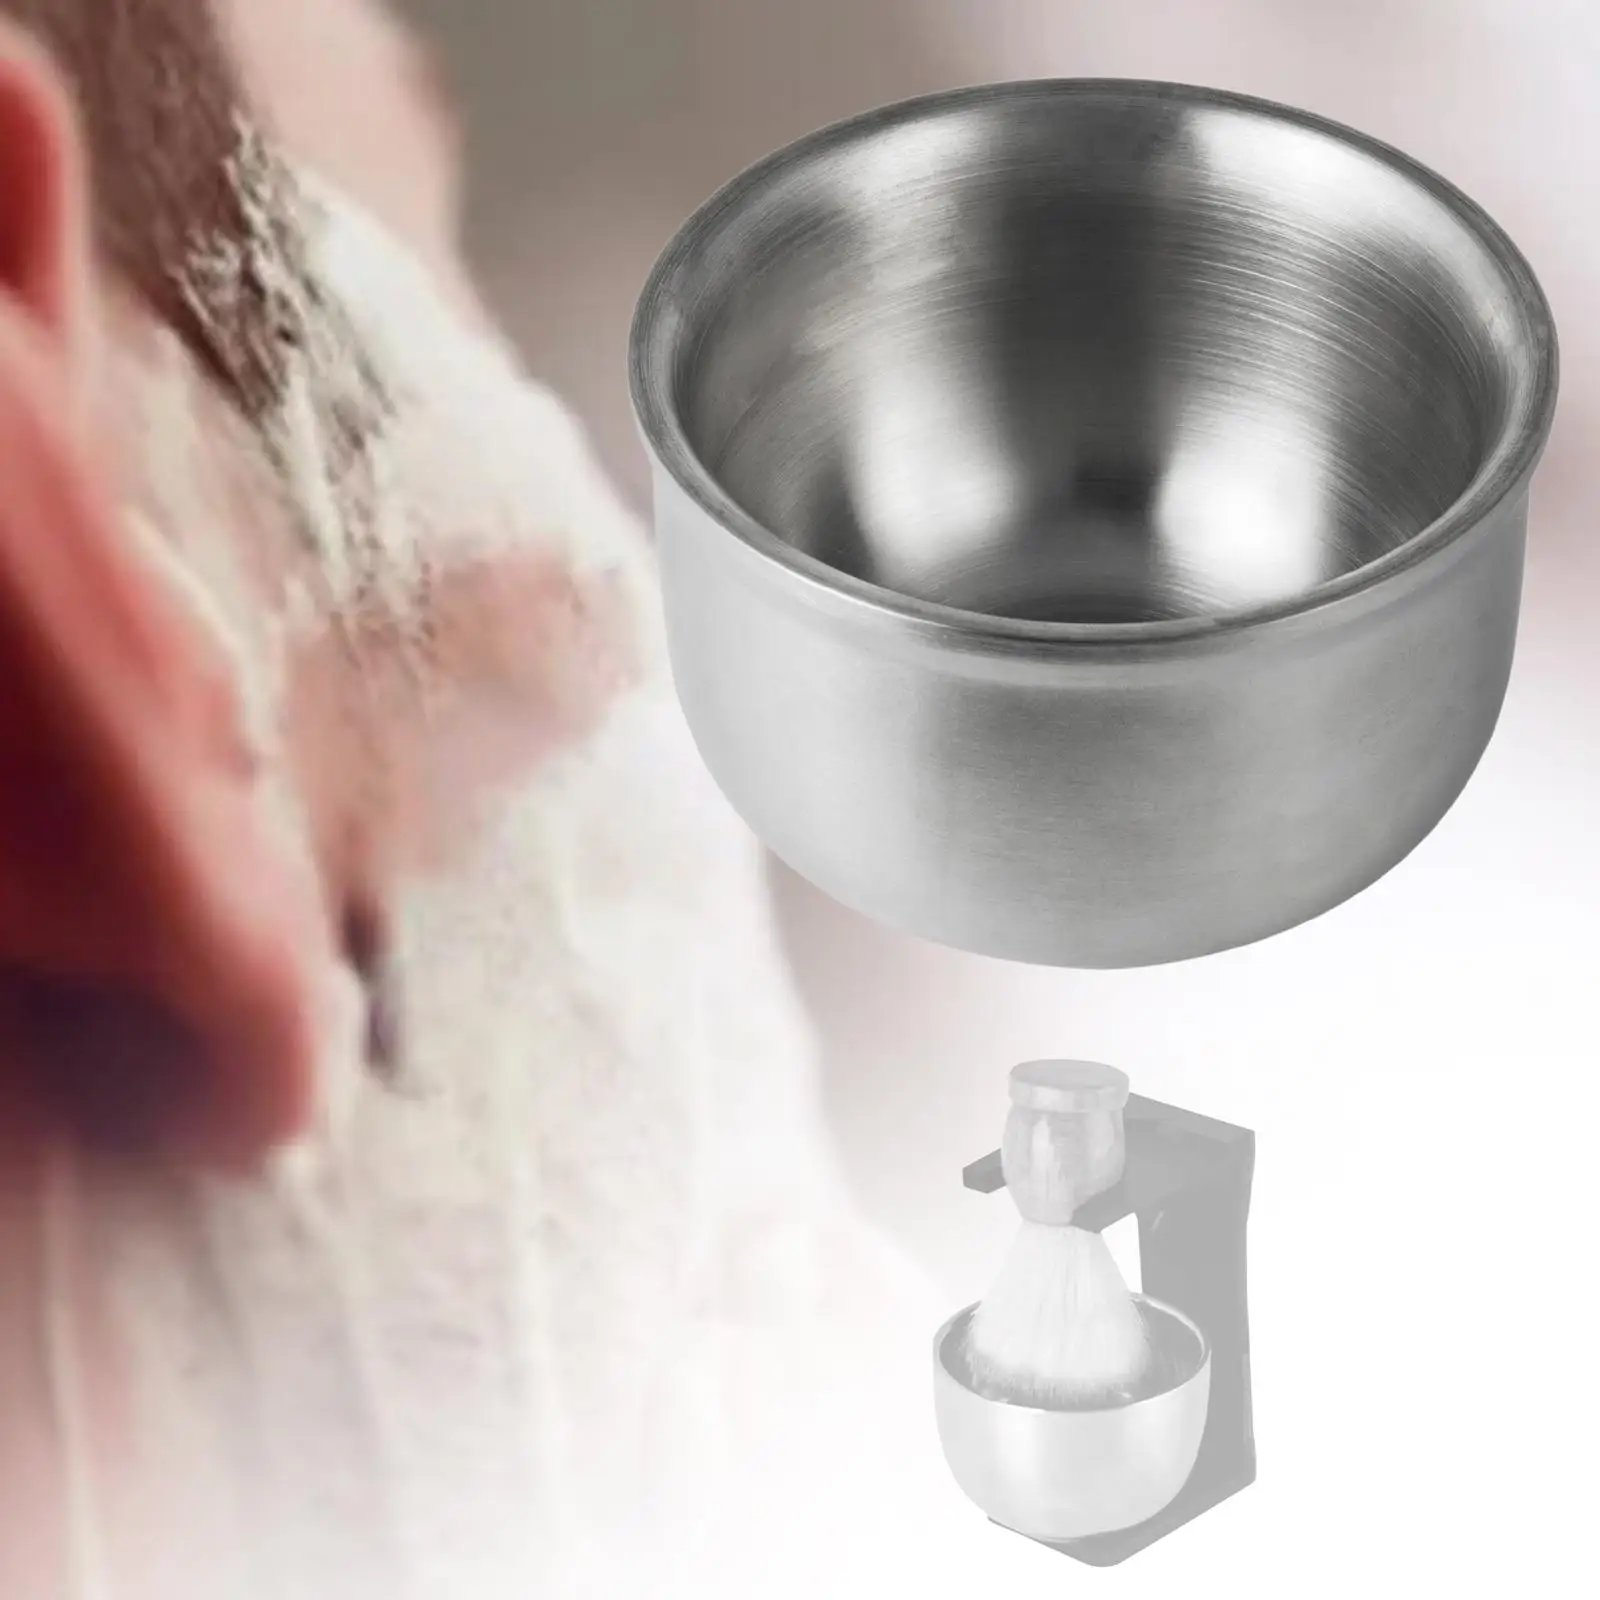 Shaving Soap Bowl Stainless Steel Produce Rich Foam Fits Wet Shave Small Portable Smooth Shave Cream and Soap Bowl for Men Gift